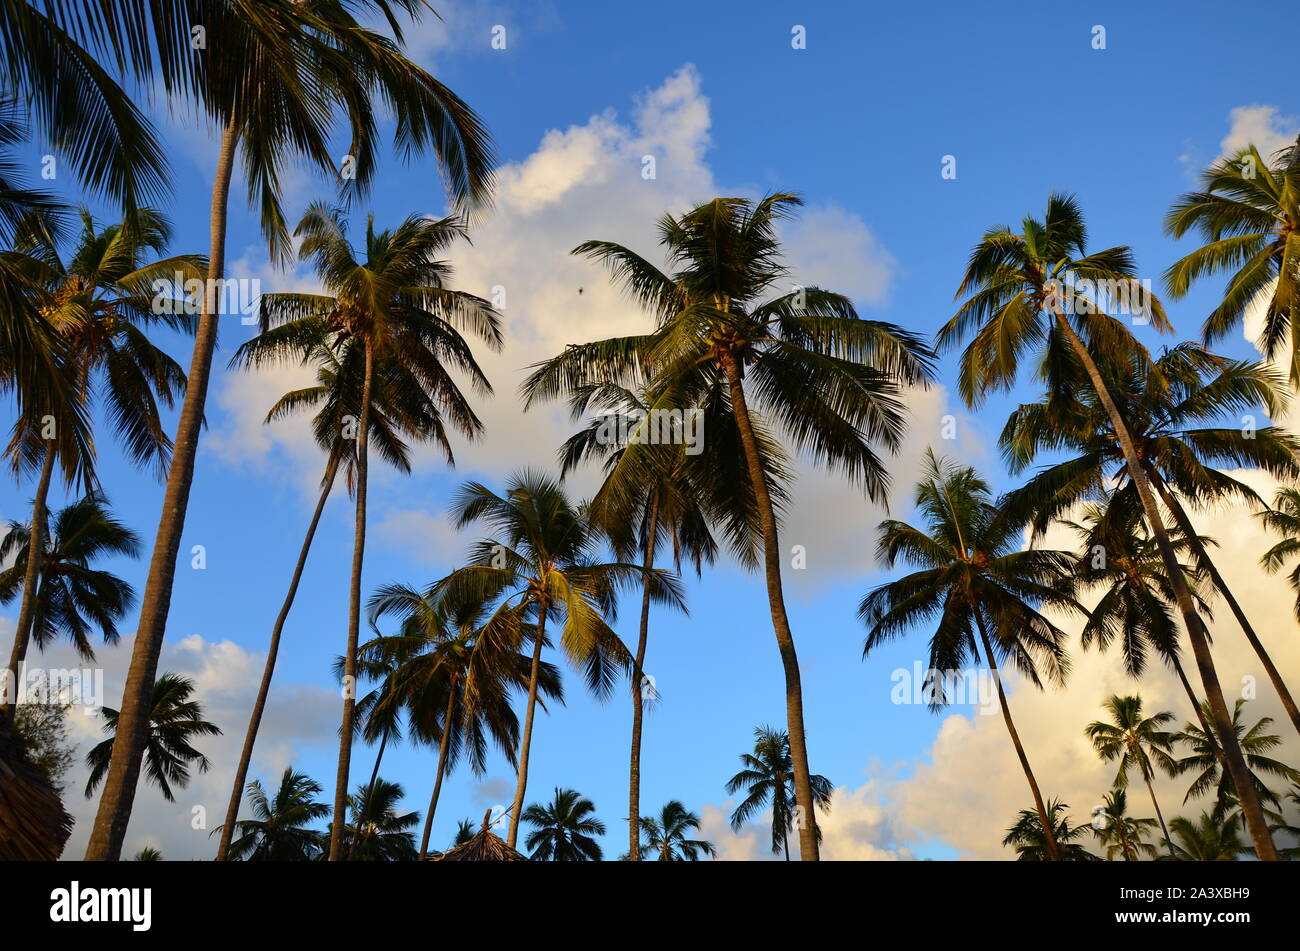 The view of the palm trees on tropical island Stock Photo